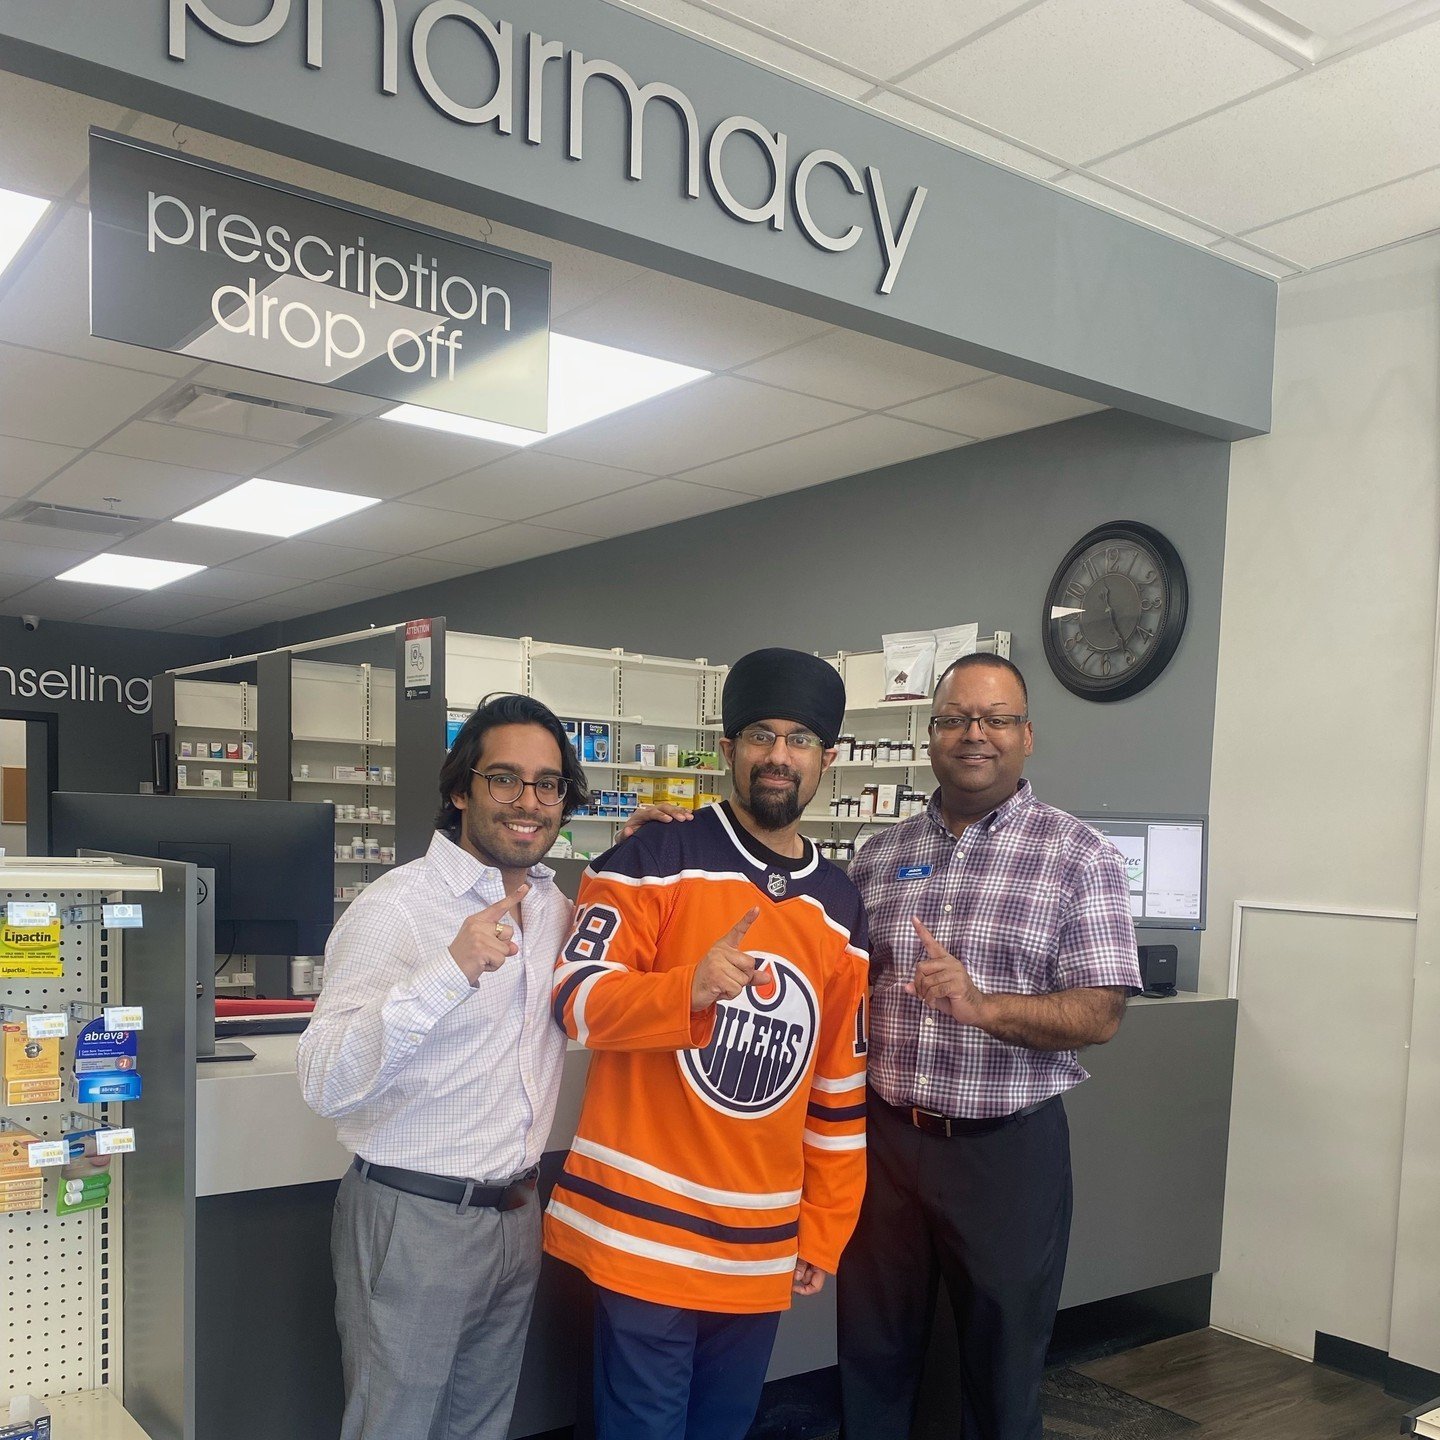 Are your prescriptions running Drai? Come see us at Zia Pharmacy located in our Southtrail Plaza.
.
.
.
#ZiaPharmacy #EdmontonSouthtrail #Prescriptions #Oilers #Playoffs #Hockey #NHL #EdmontonOilers #ConnorMcDavid #LeonDraisaitl #RyanNugentHopkins #D